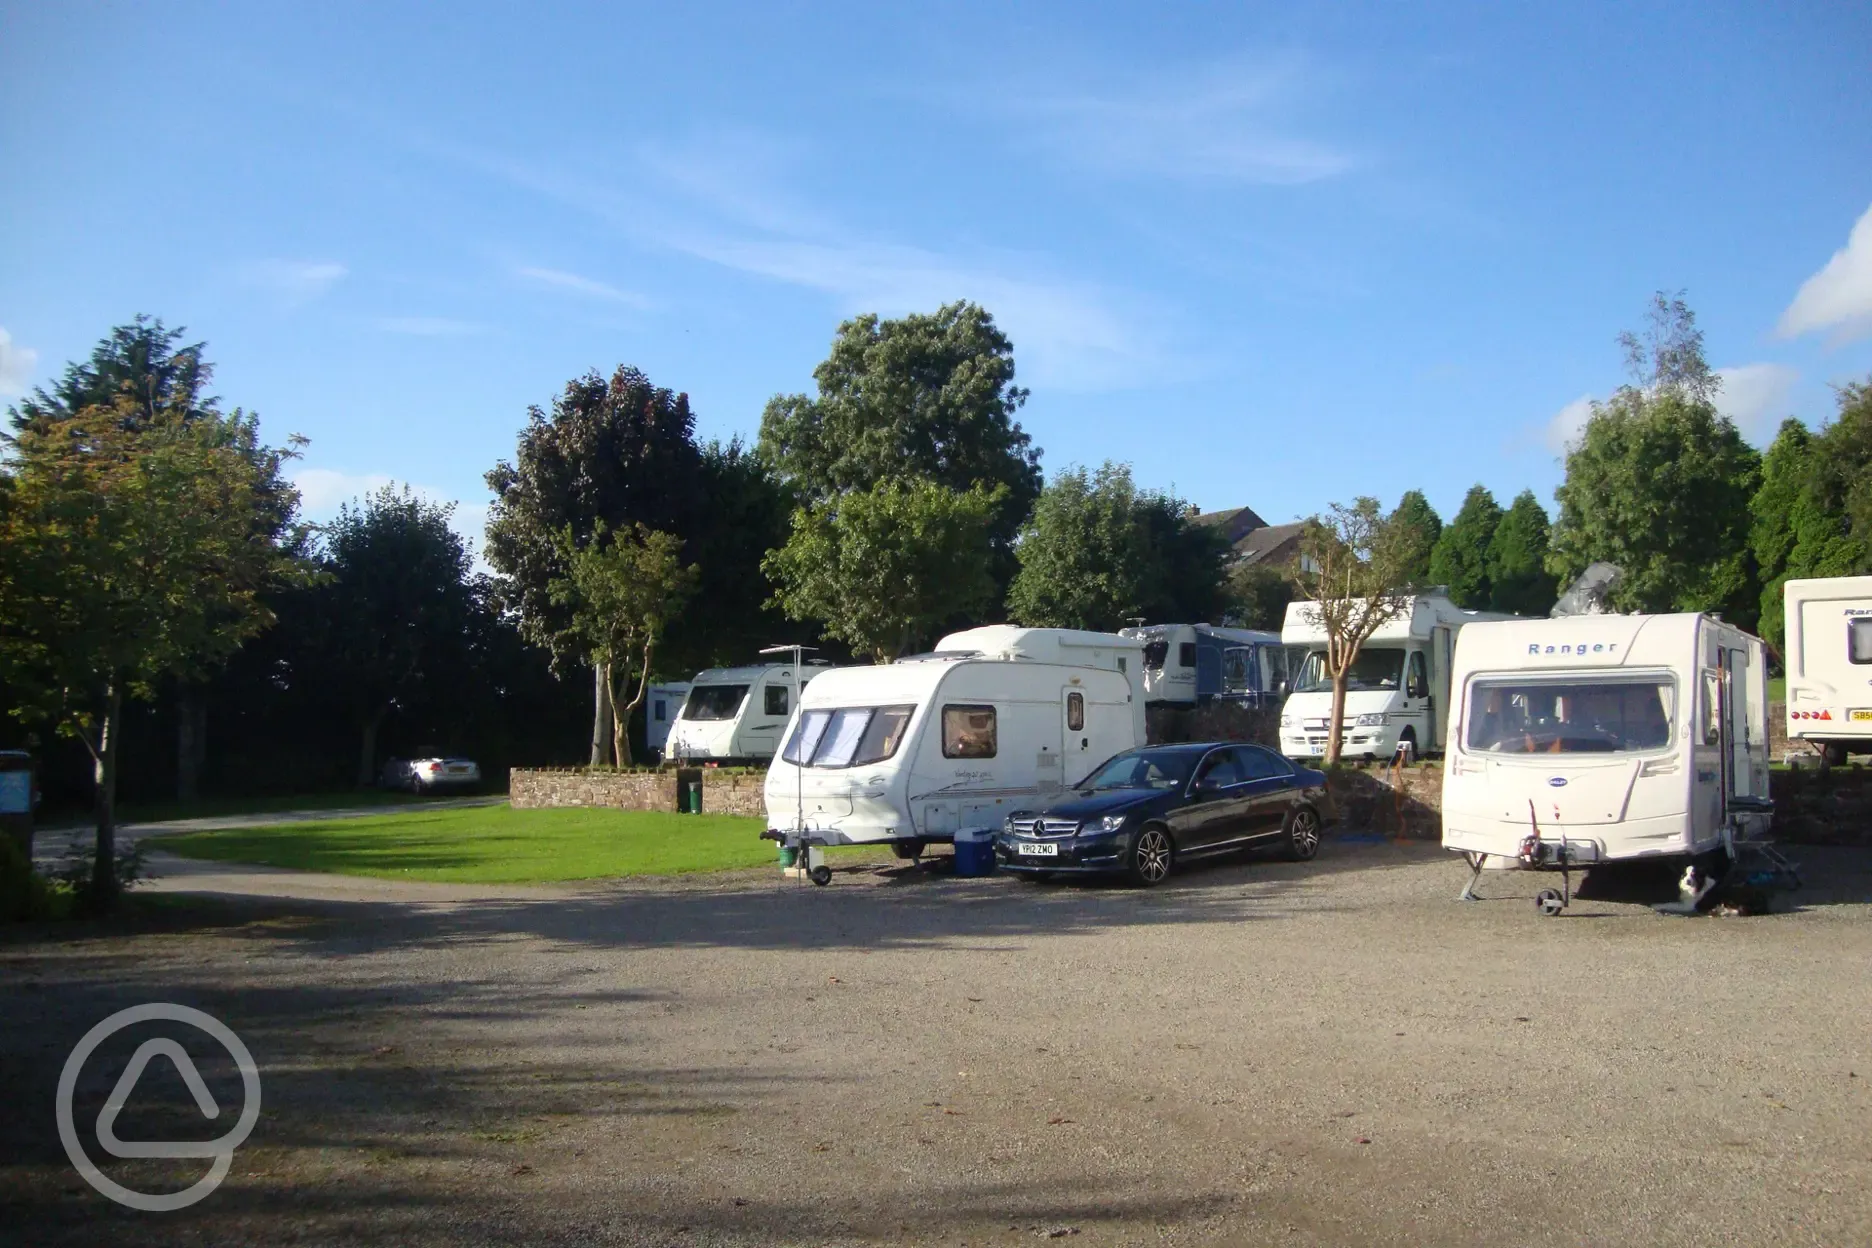 Caravans and motorhomes pitched up